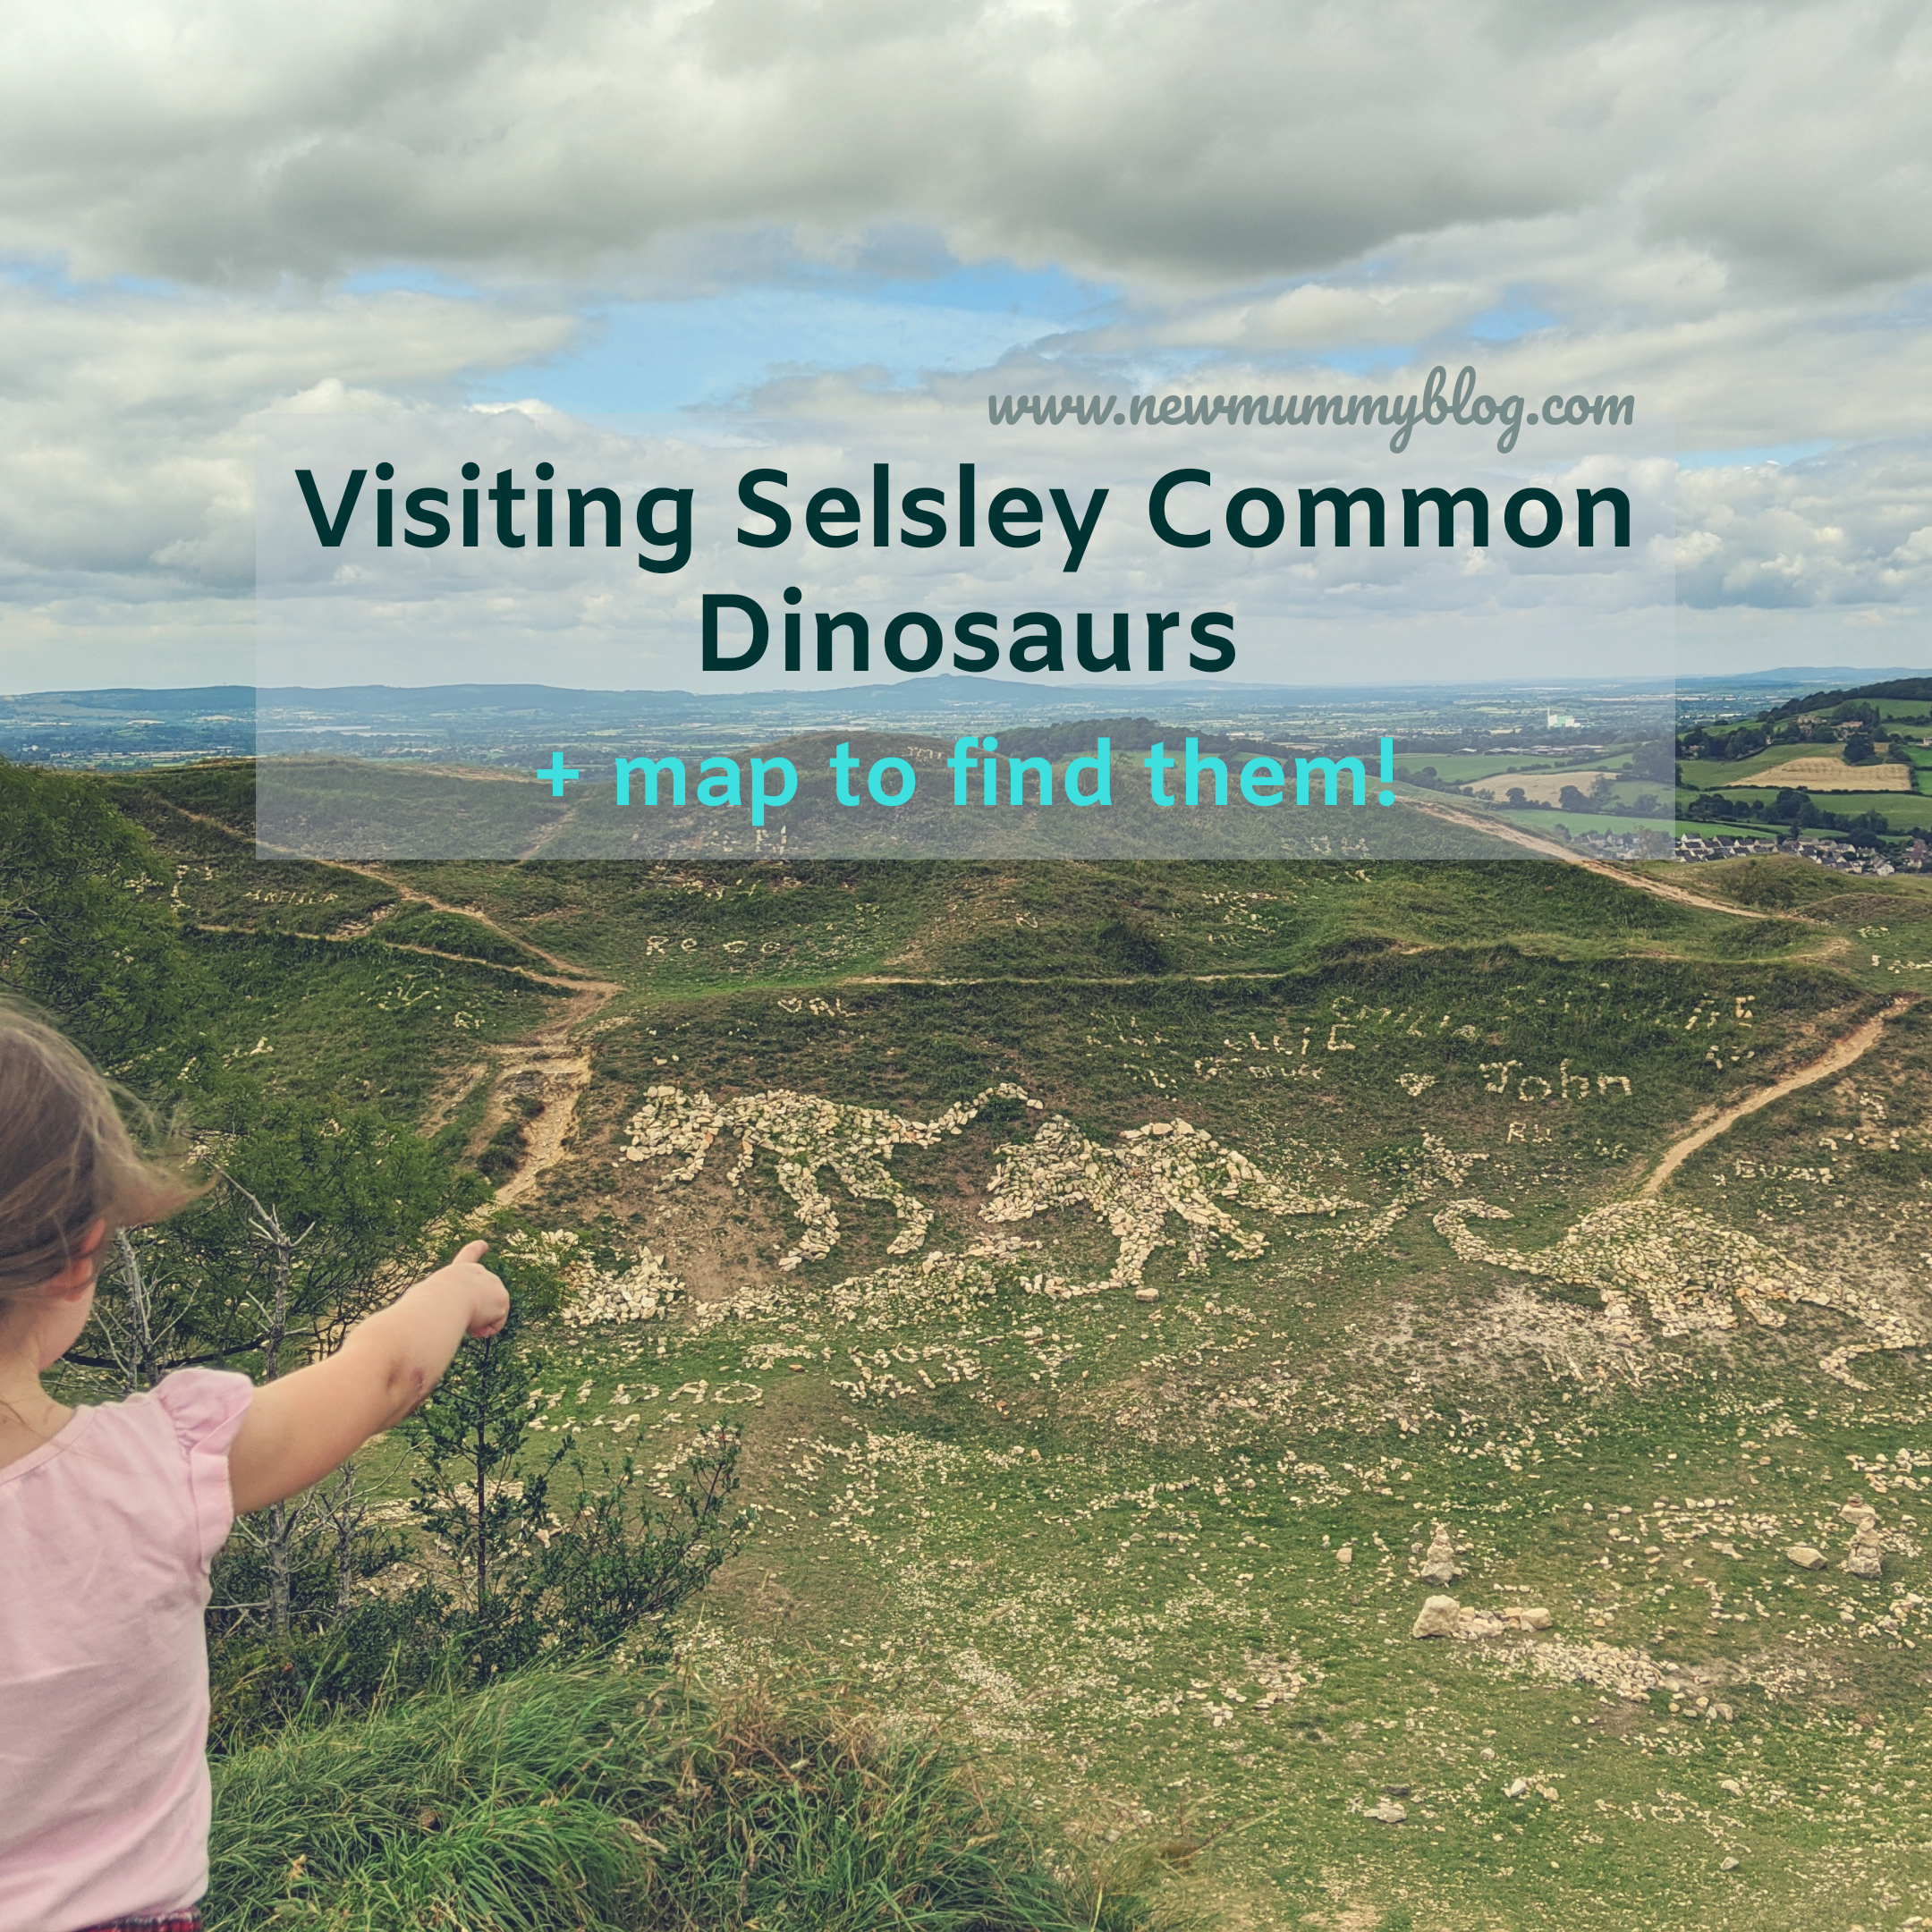 Selsley Common Dinosaurs and where to find them when you visit